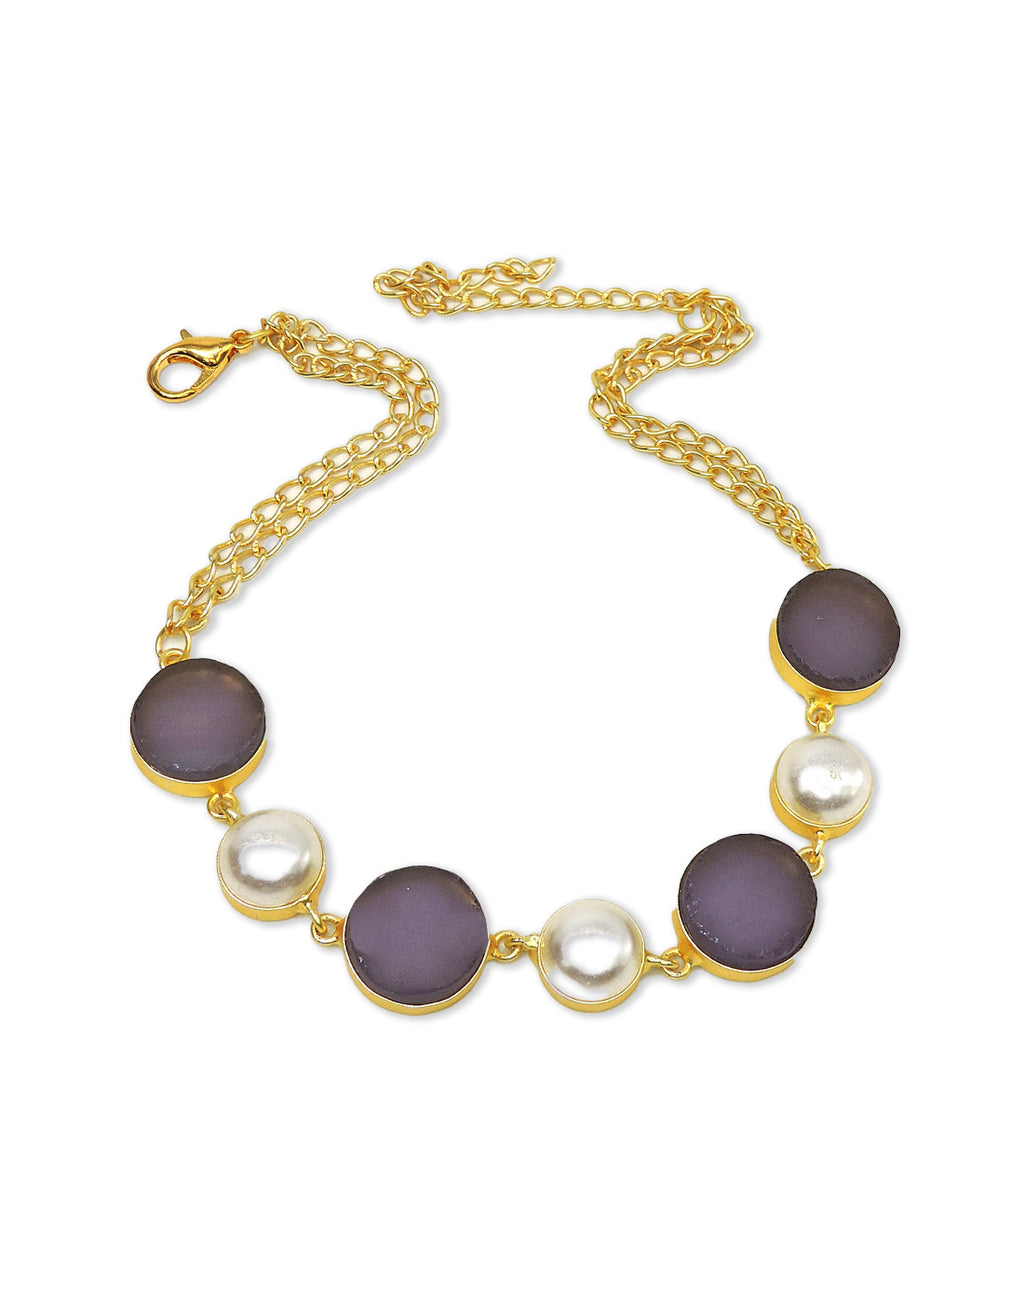 Amethyst & Pearl Necklace - Statement Necklaces - Gold-Plated & Hypoallergenic Jewellery - Made in India - Dubai Jewellery - Dori